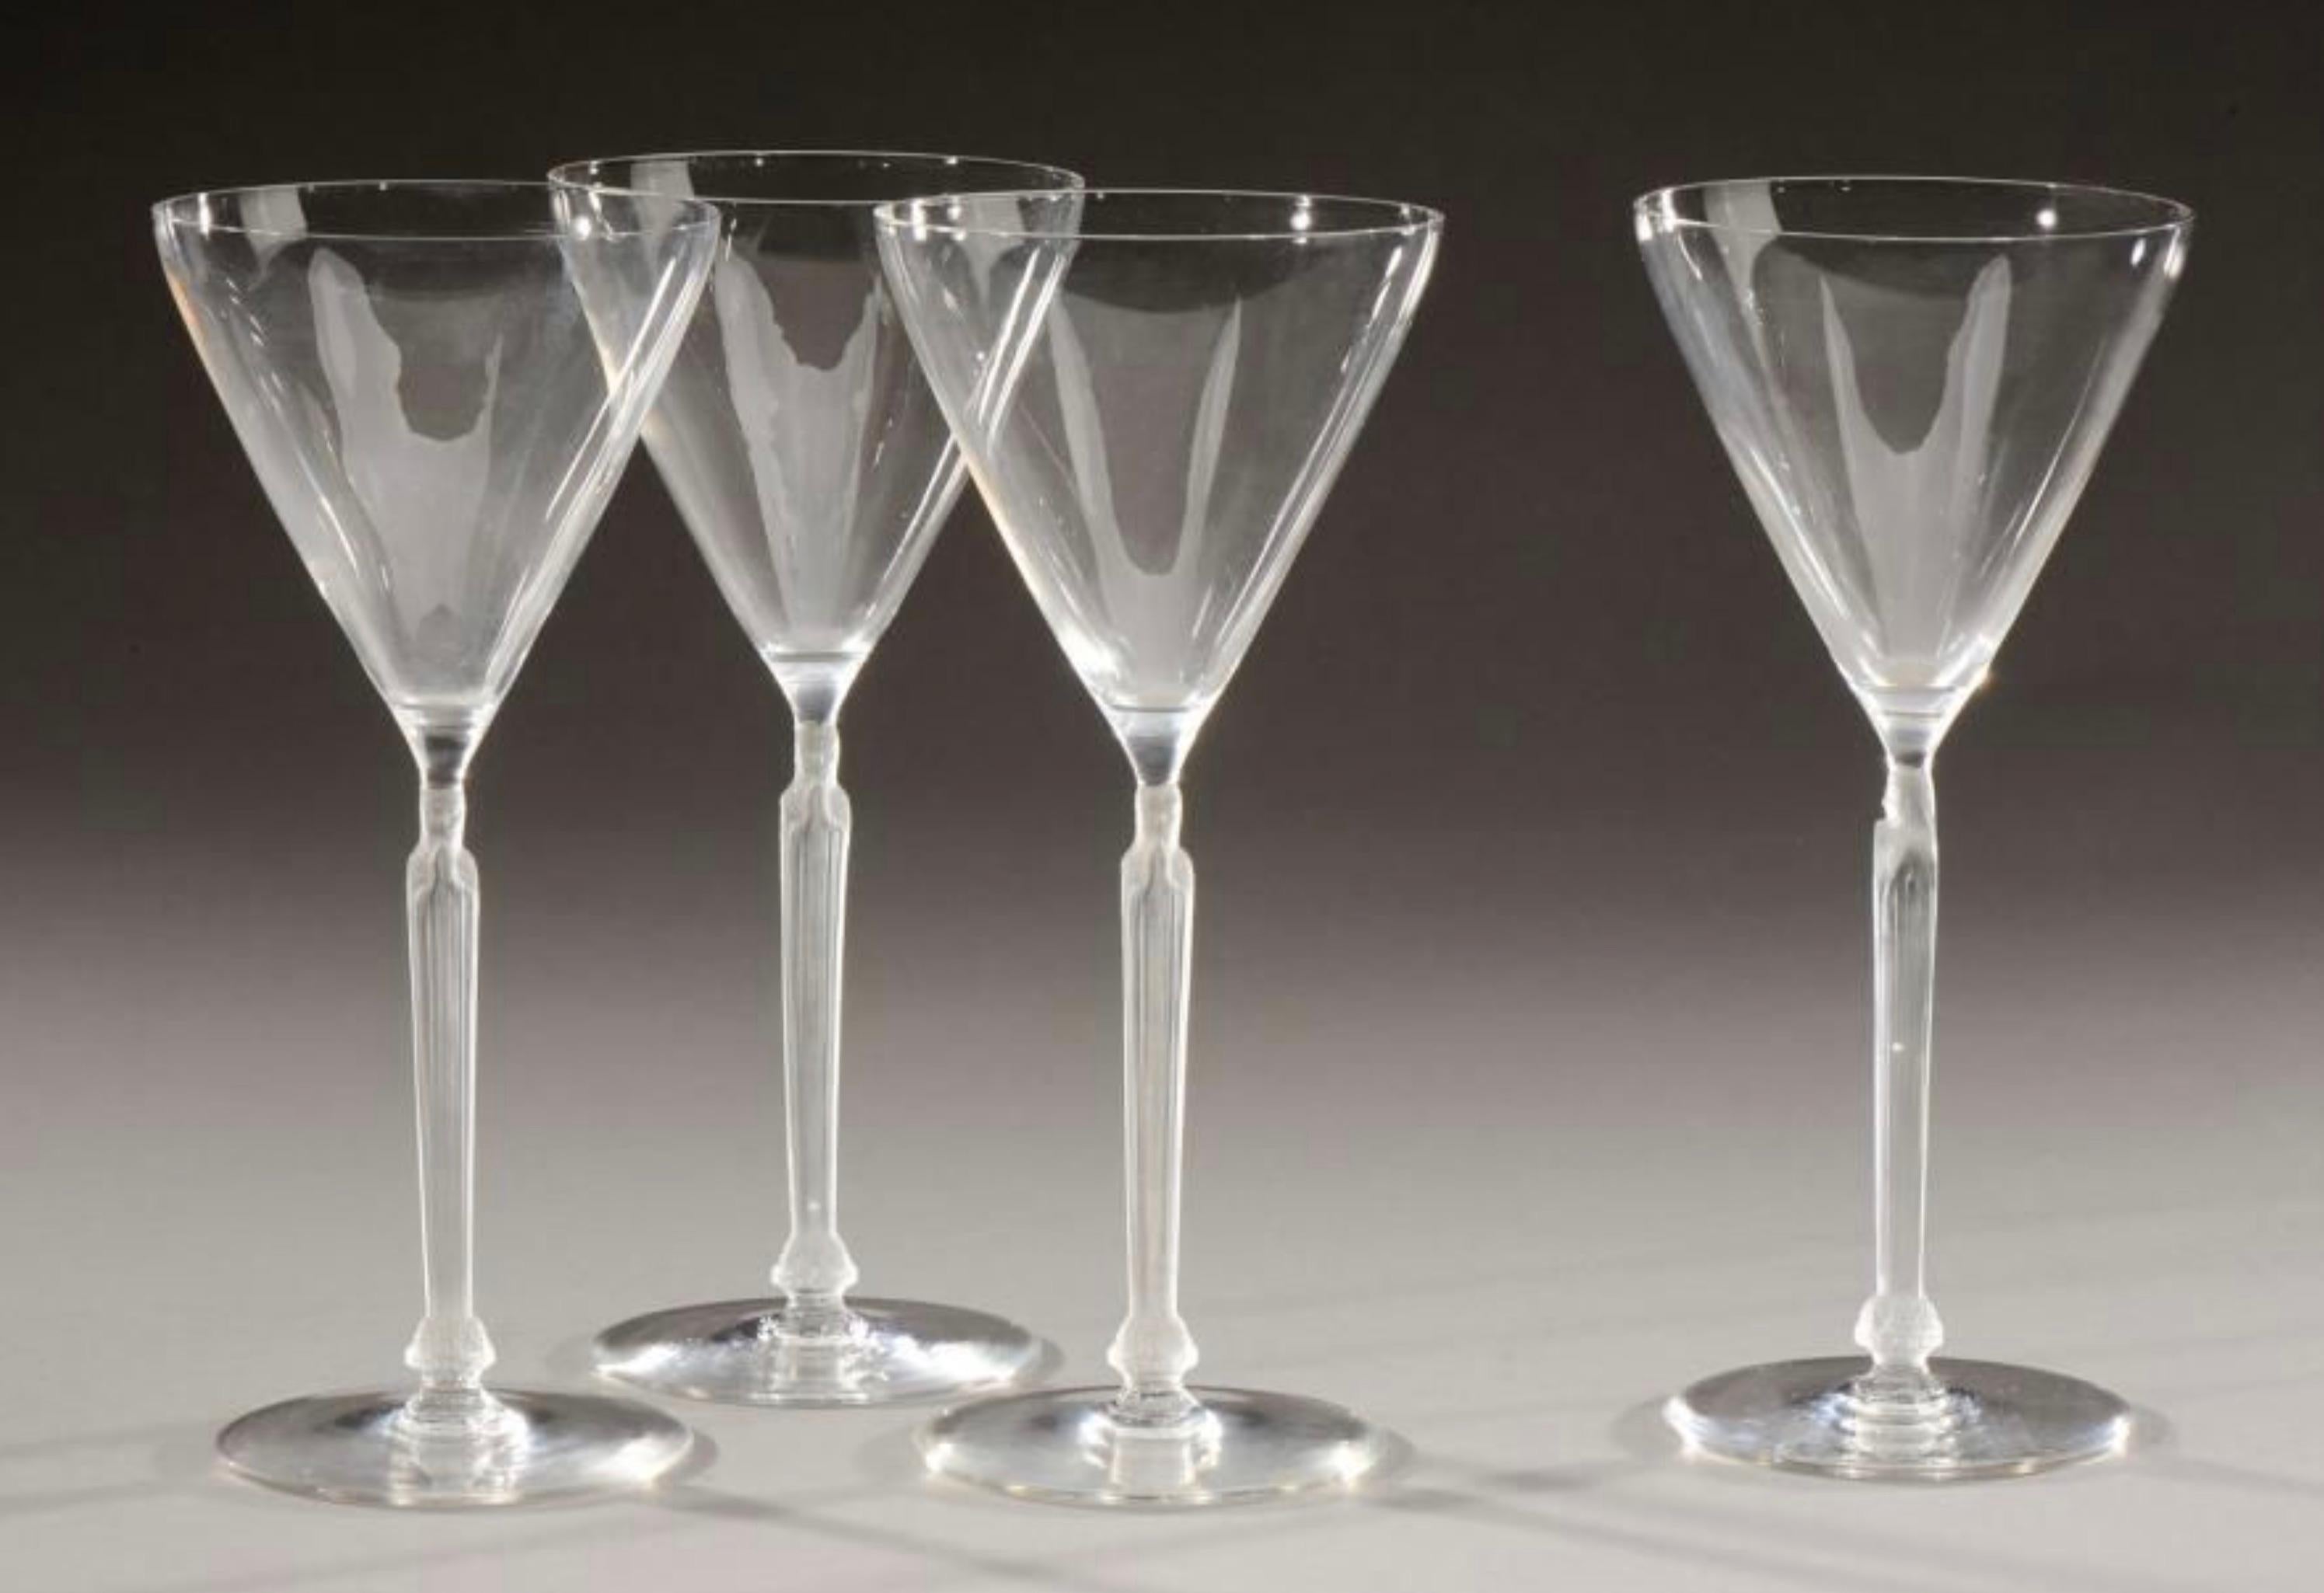 René Lalique clear glasses with round base and frosted robed female stem
Set of 4 glasses in plain, blown-moulded glass, model 